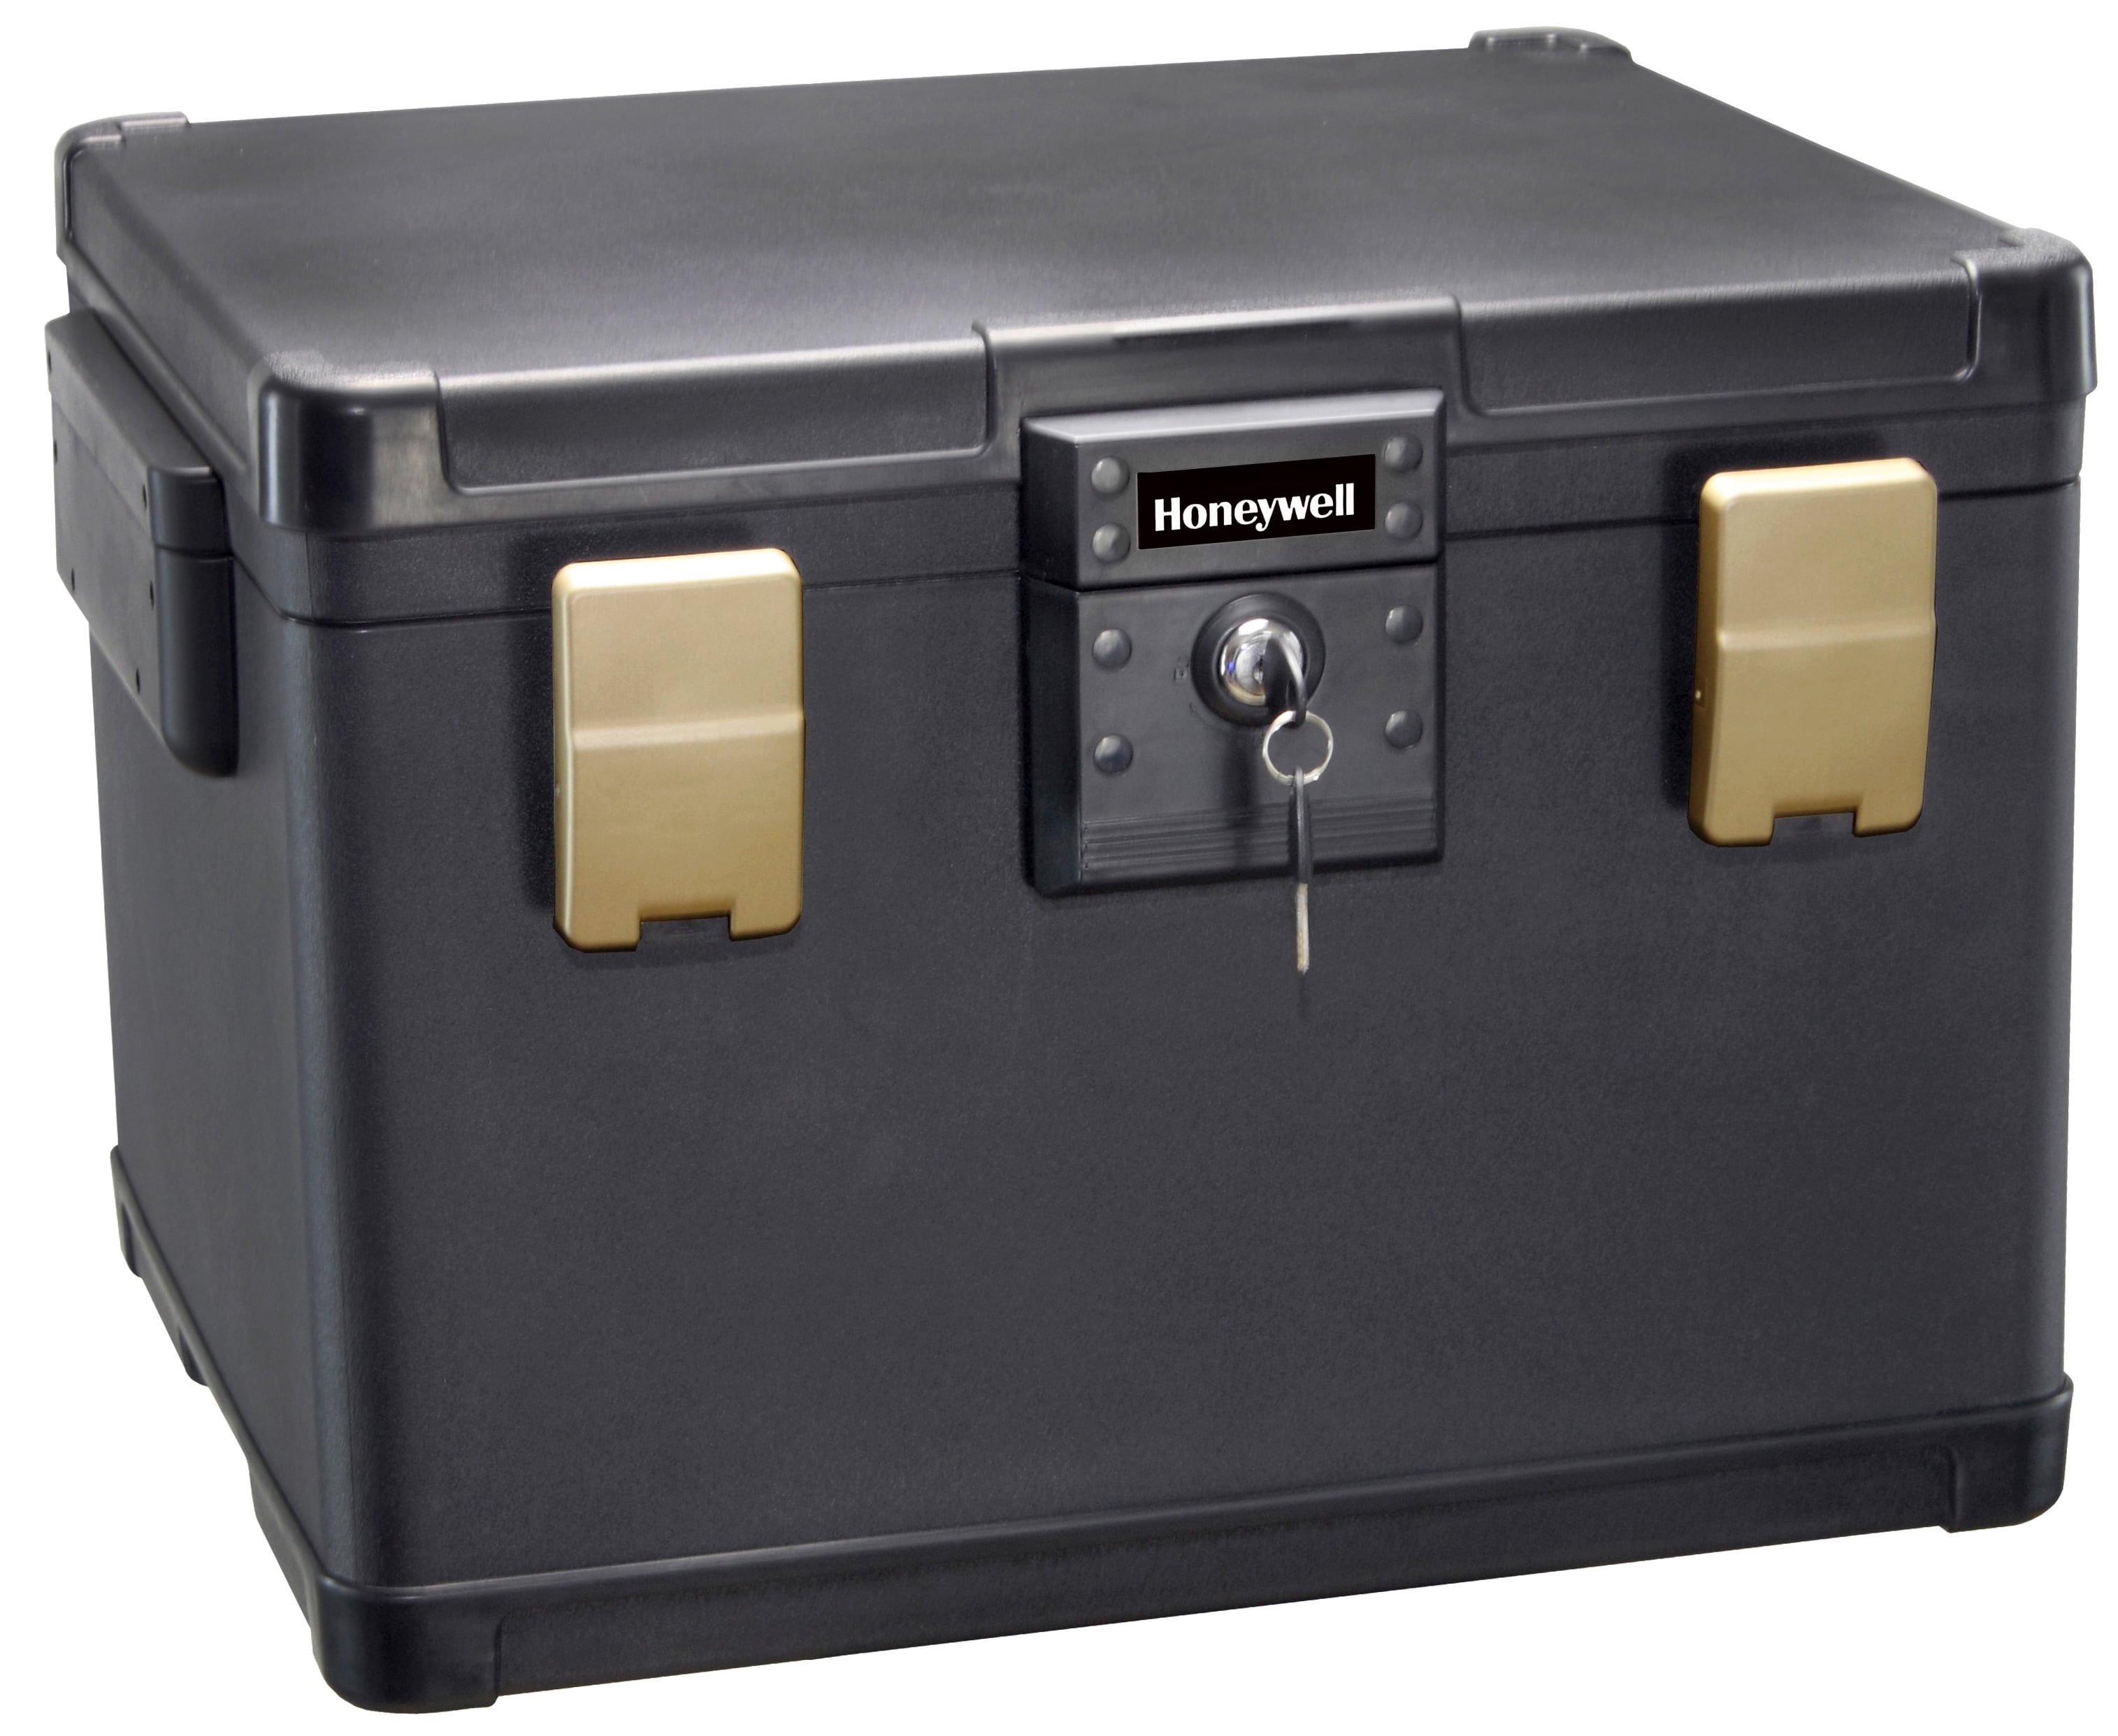 Honeywell Safes, 1.06 Cu ft, 30-Minute Fire Safe Waterproof Filing Box  Chest (fits Letter, A4 Files), 1108